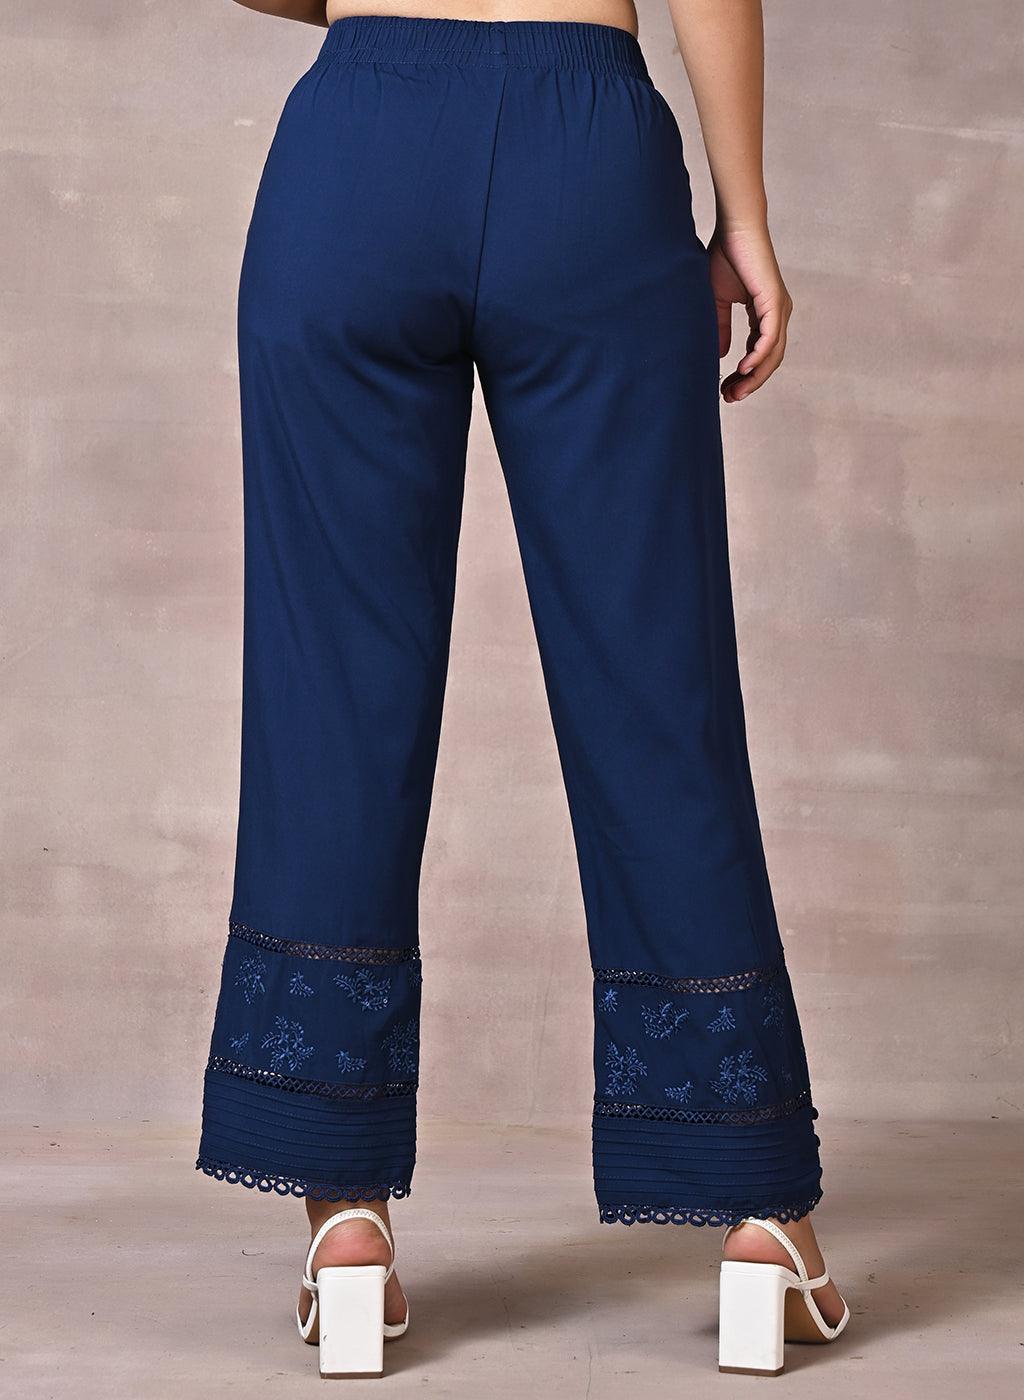 LASTINCH All Size's Solid Navy Blue Palazzo Pants